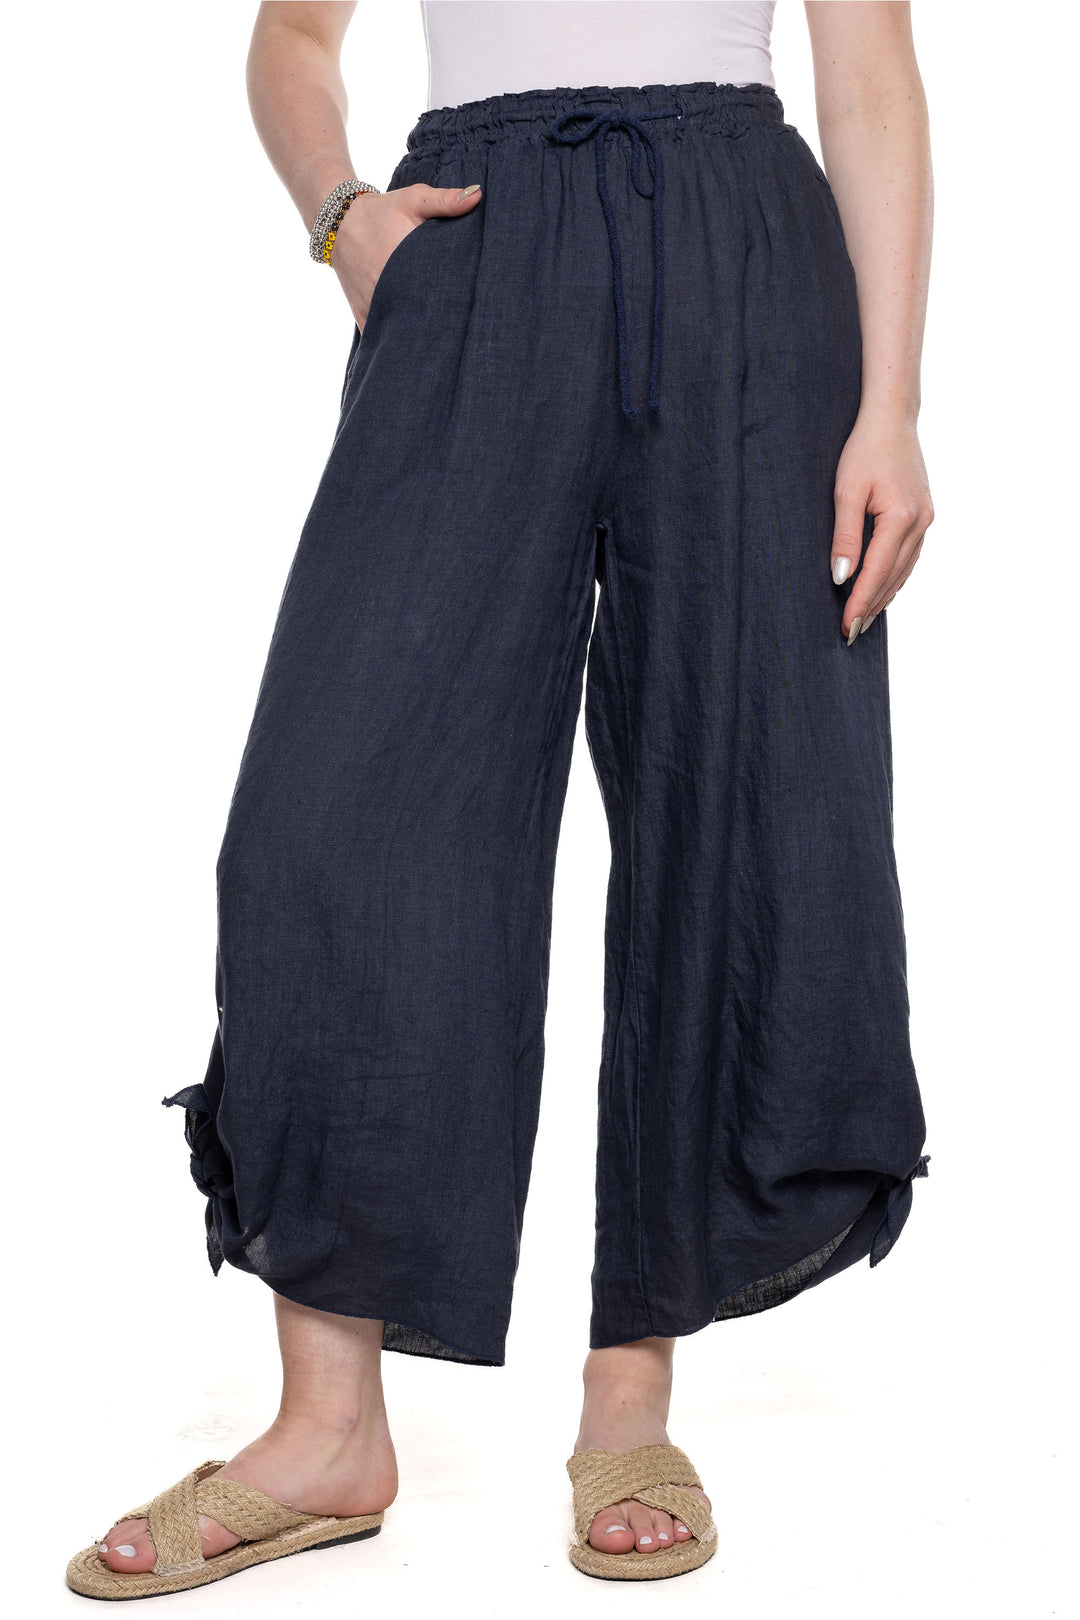 Etern Elle Summer 2024 Crafted from lightweight linen, these pants feature a loose hem, front pockets and a balloon silhouette for a classic look.